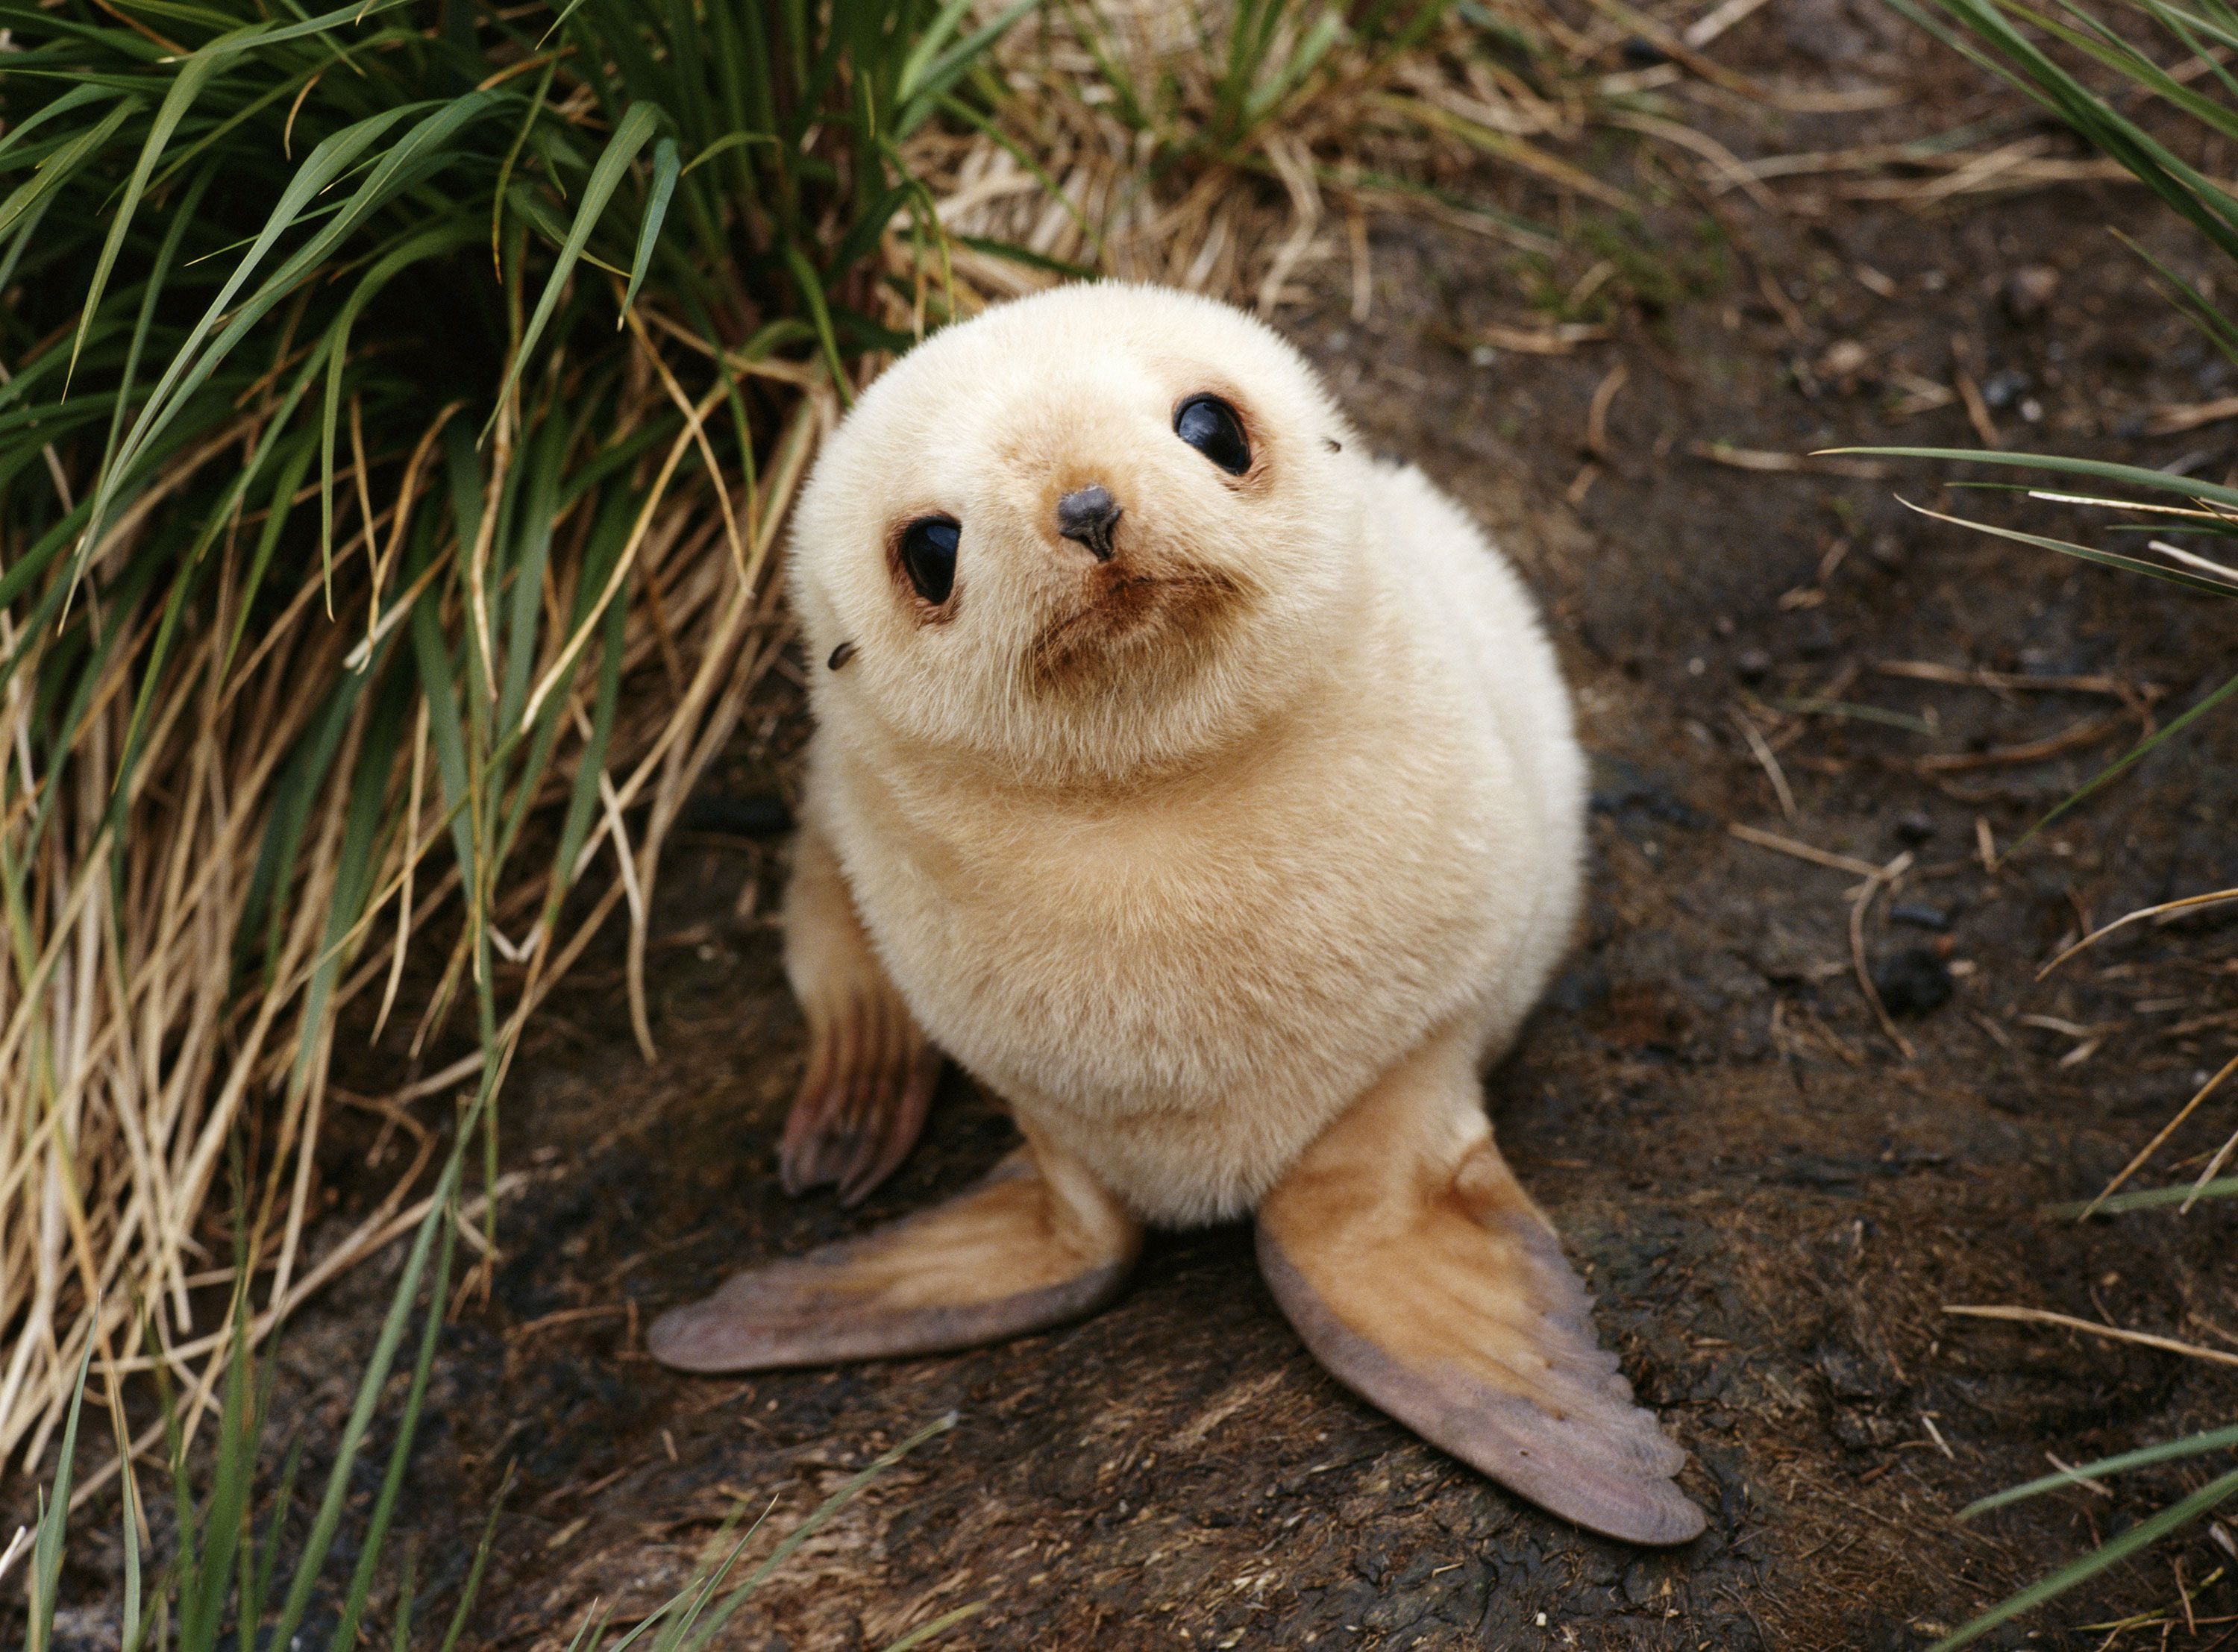 Seal Pick Sex - Cute Aggression: Why I Want to Smoosh This Sweet Baby Seal